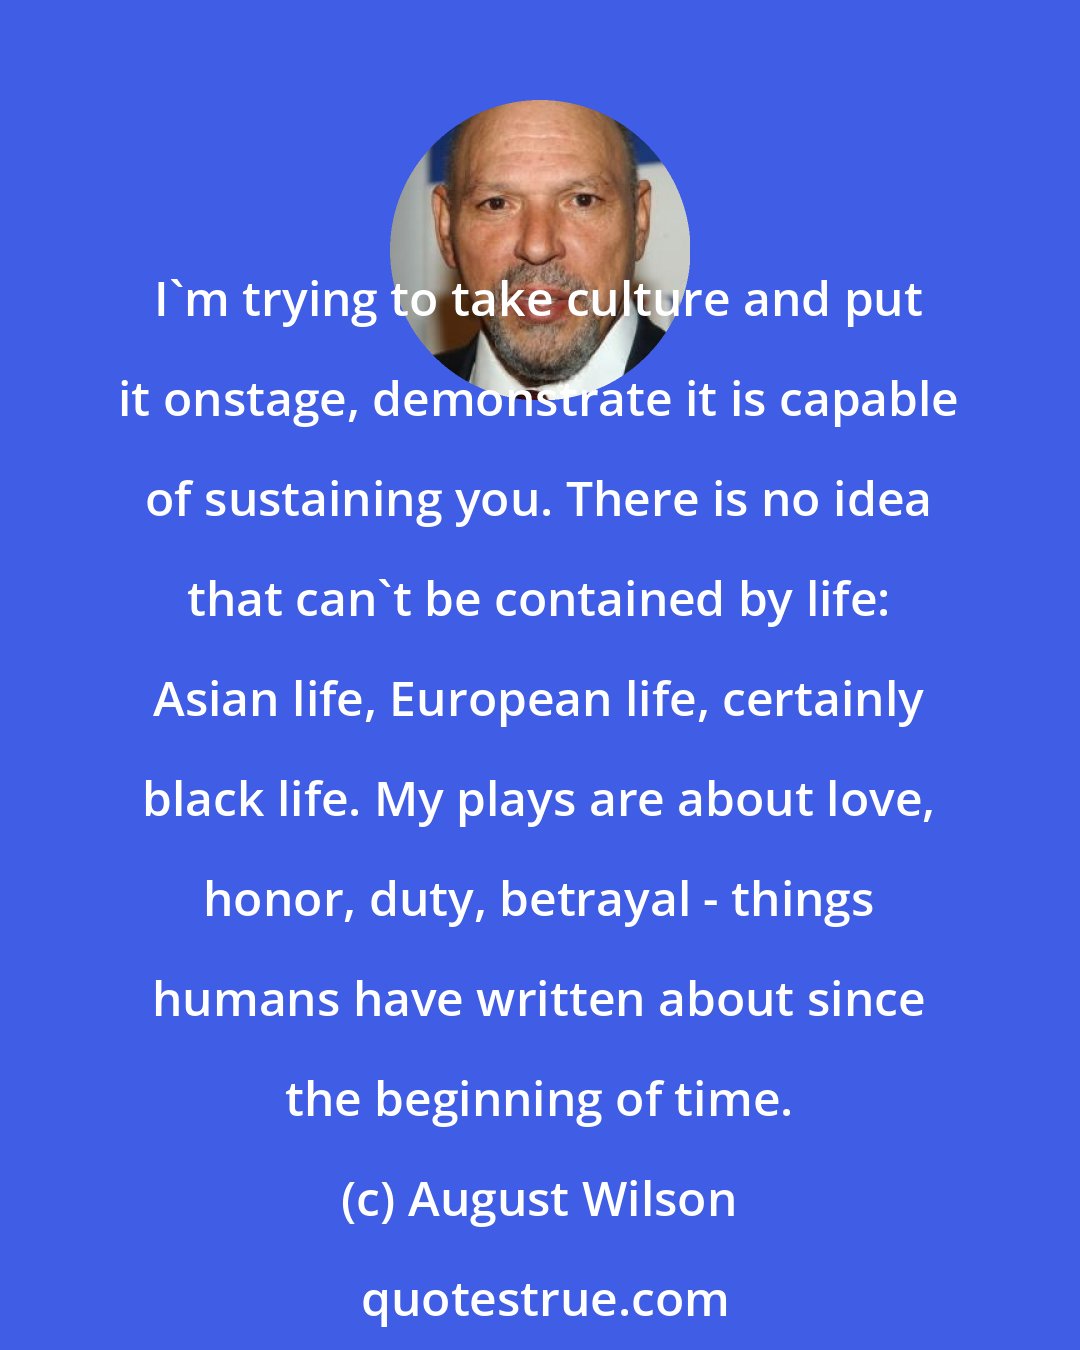 August Wilson: I'm trying to take culture and put it onstage, demonstrate it is capable of sustaining you. There is no idea that can't be contained by life: Asian life, European life, certainly black life. My plays are about love, honor, duty, betrayal - things humans have written about since the beginning of time.